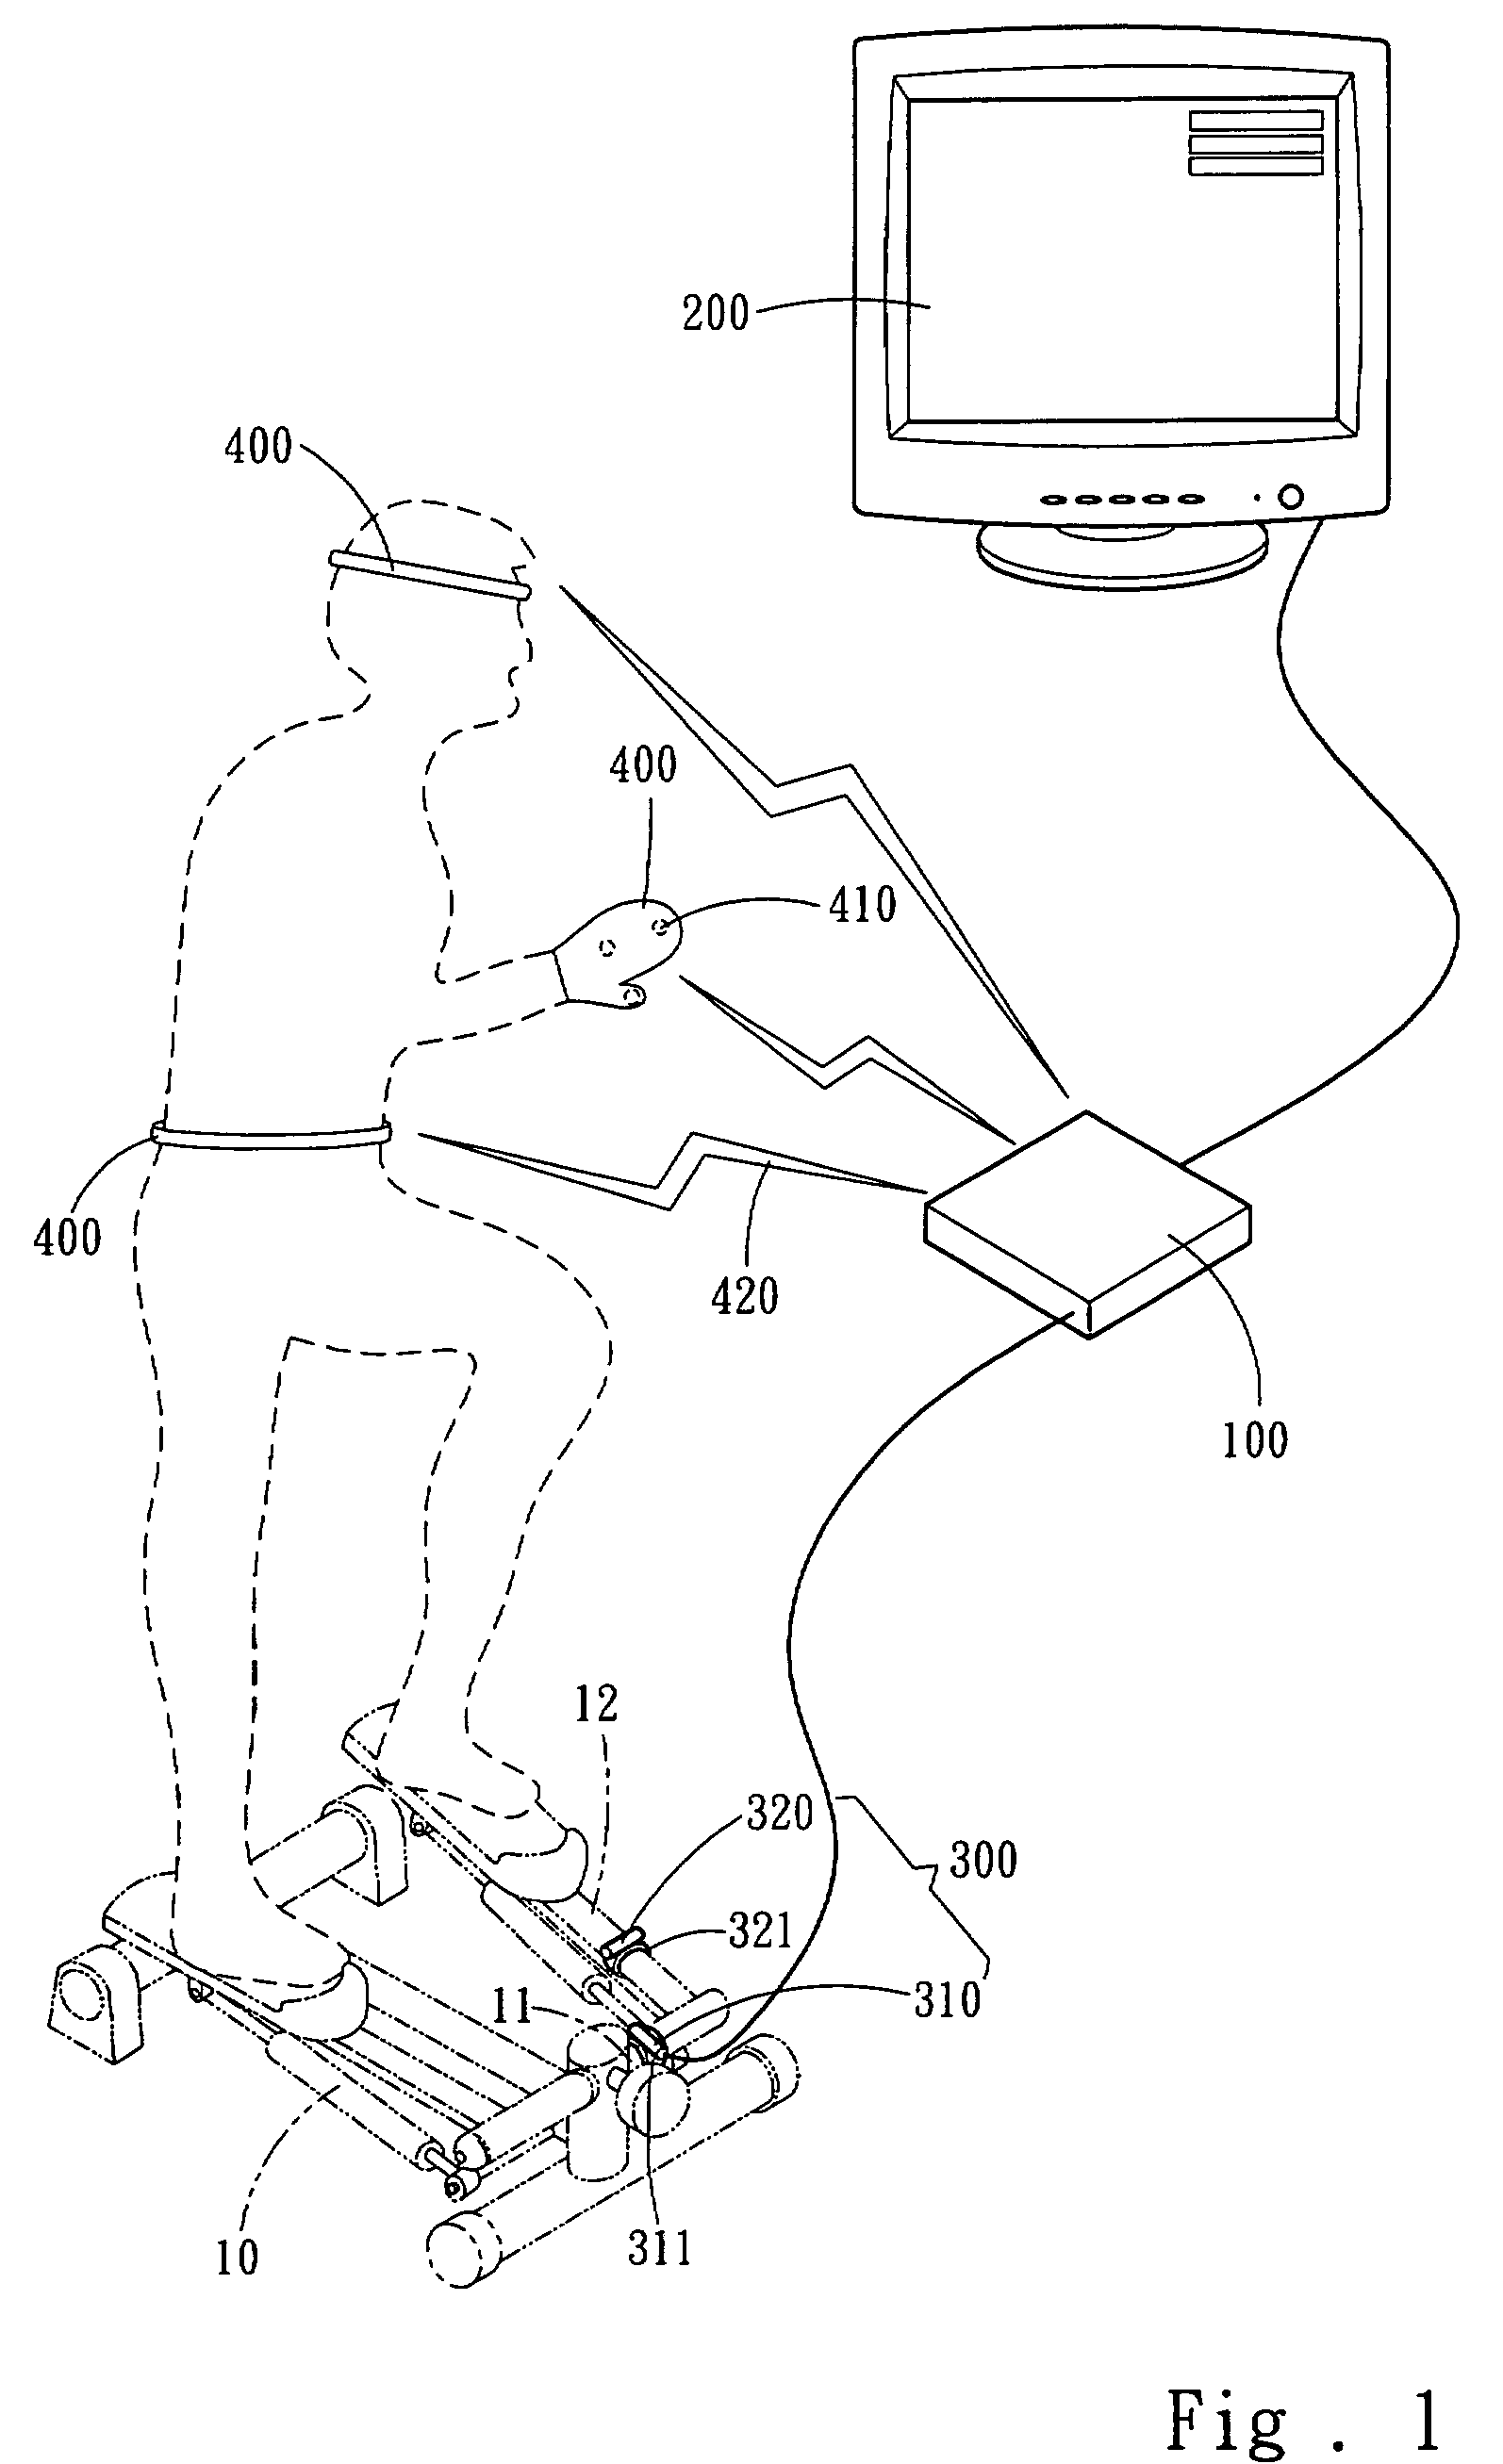 Video interaction device for a whole-body sport game